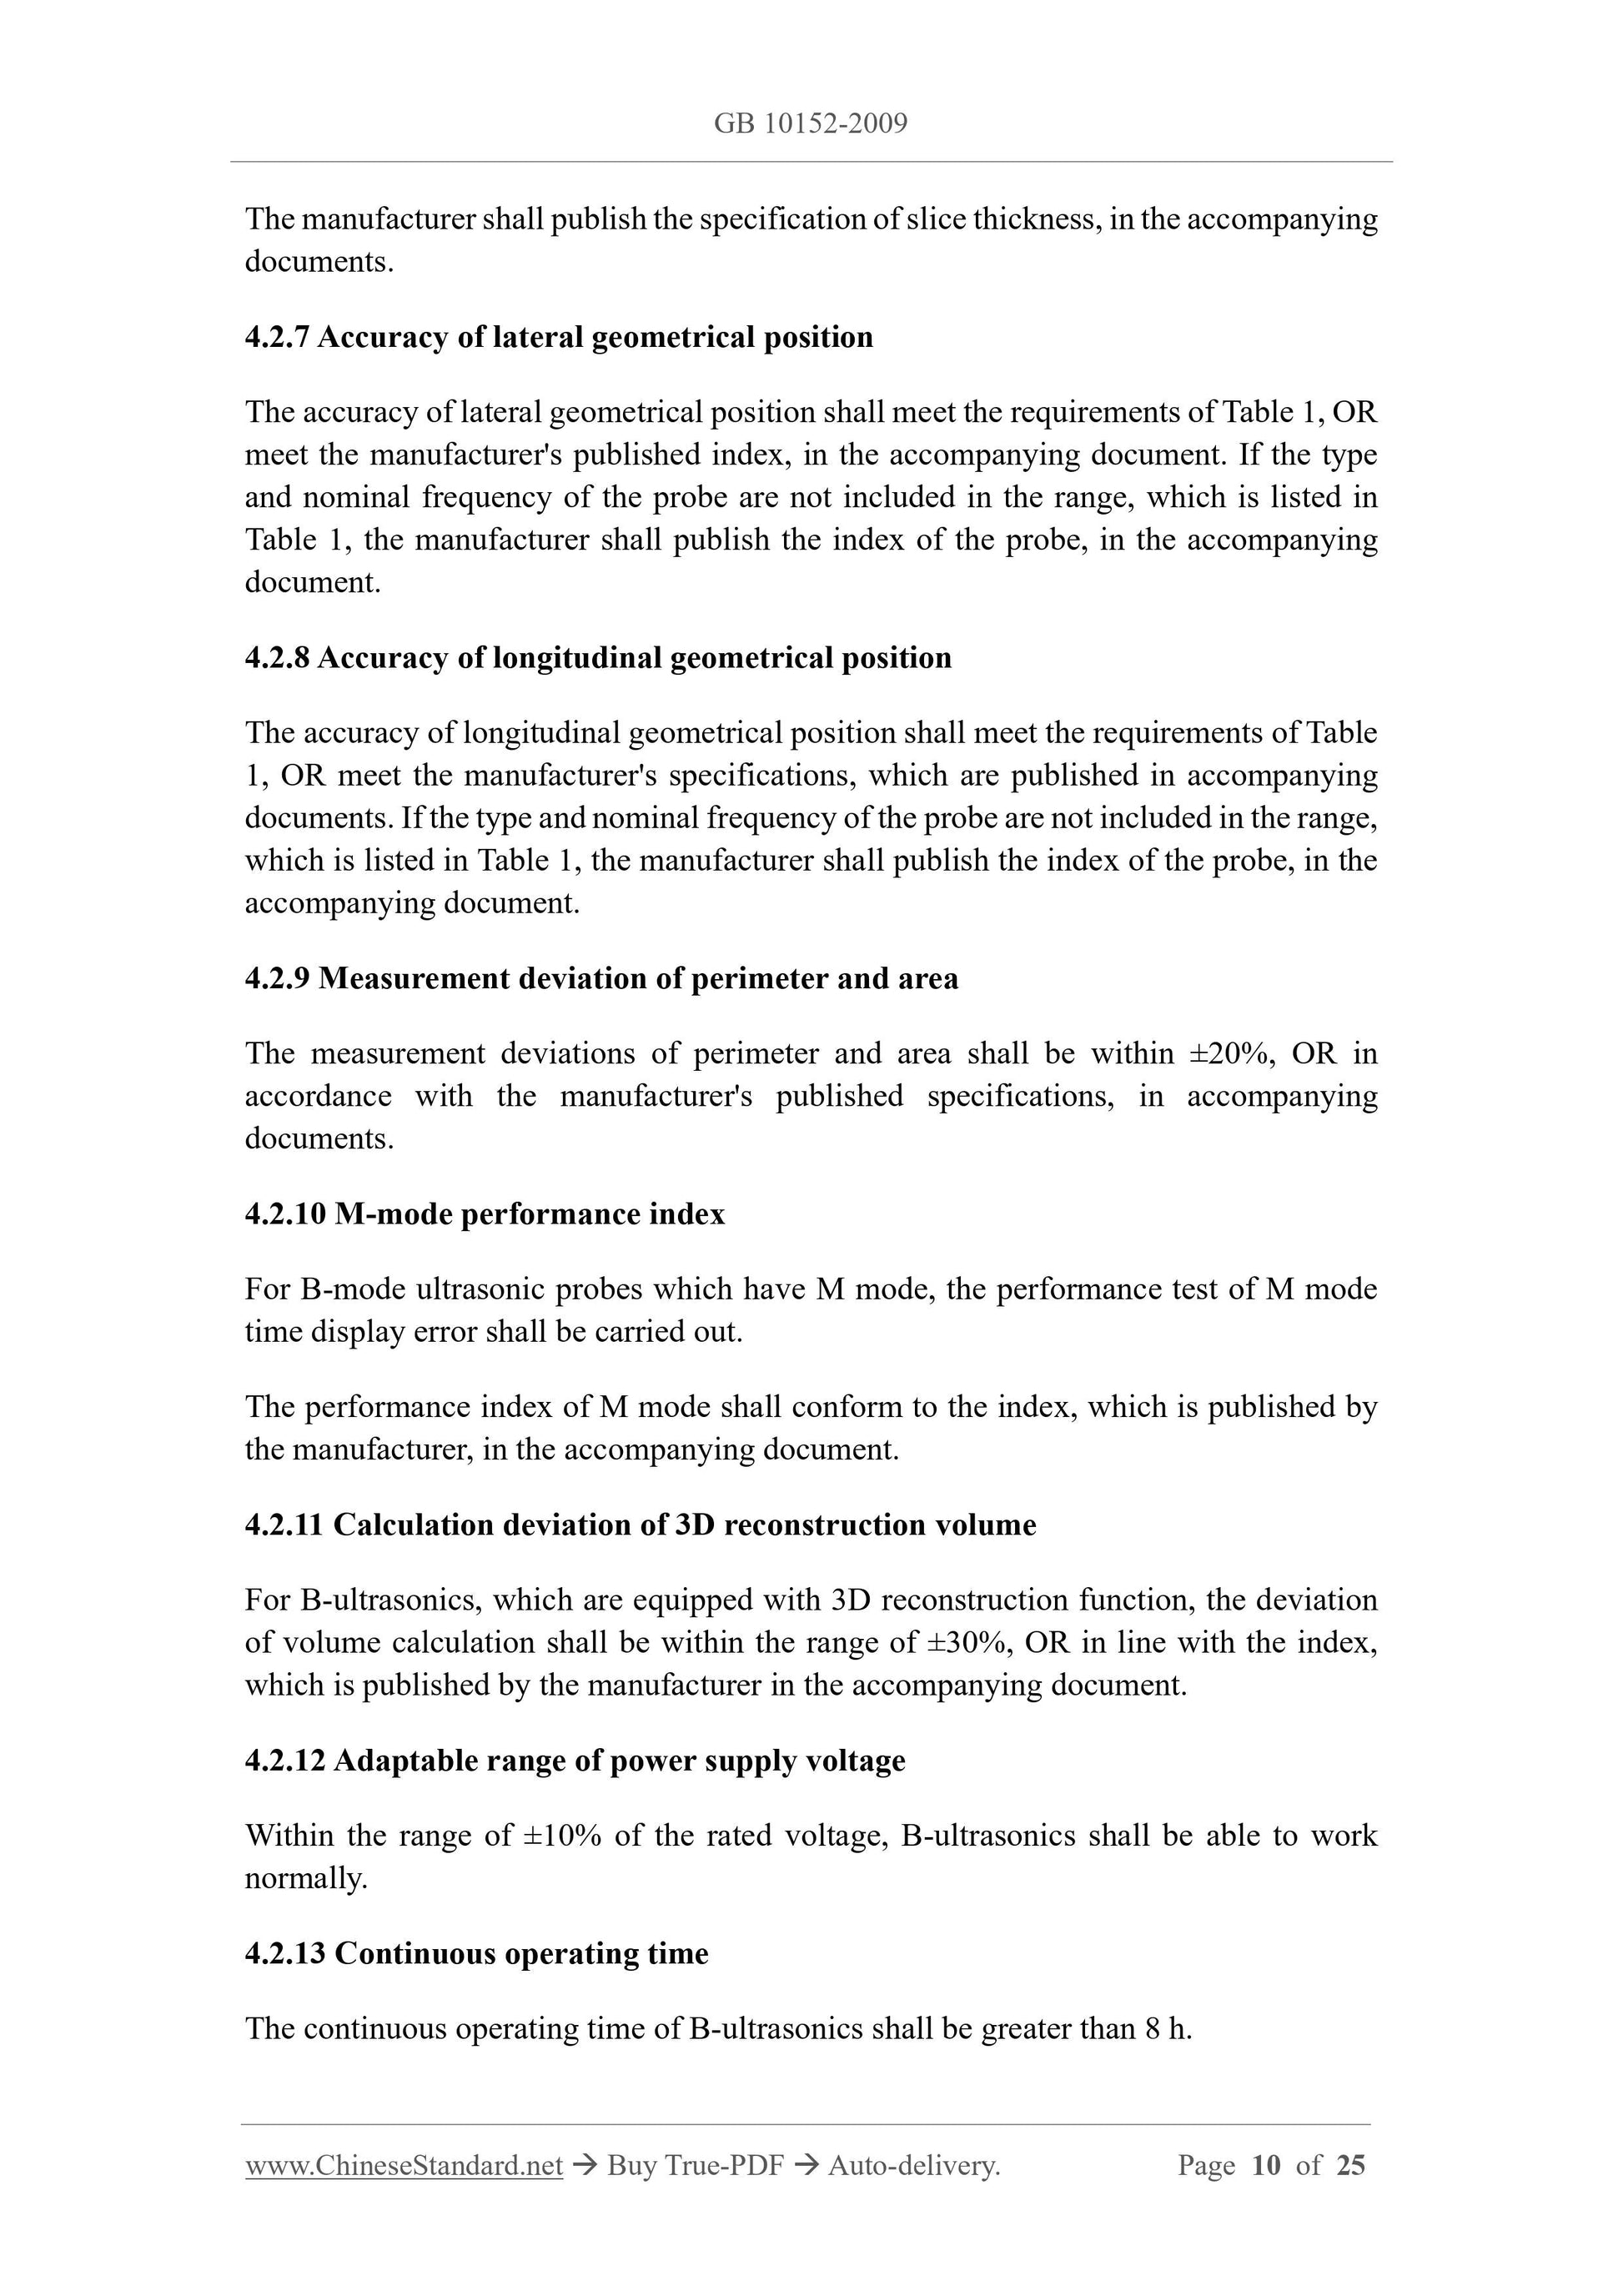 GB 10152-2009 Page 4